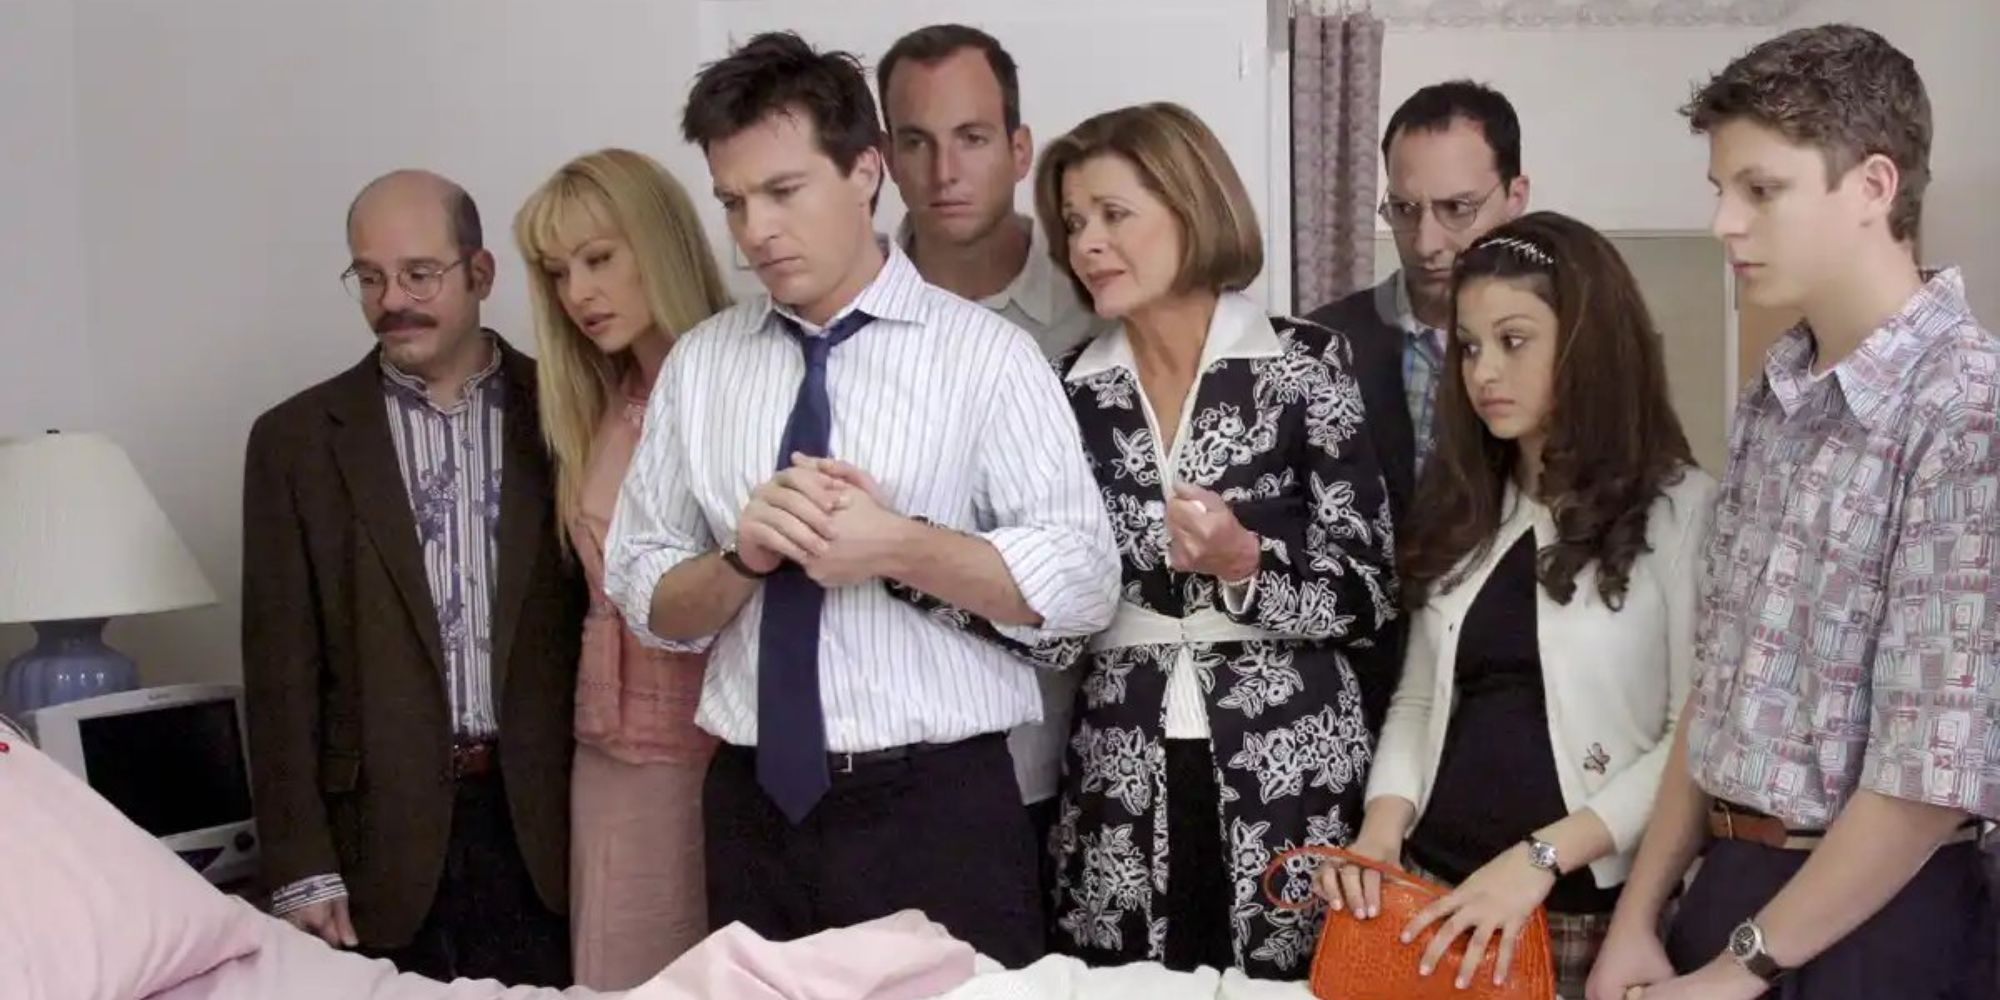 The cast of Arrested Development looking in the same direction while at a hospital room.